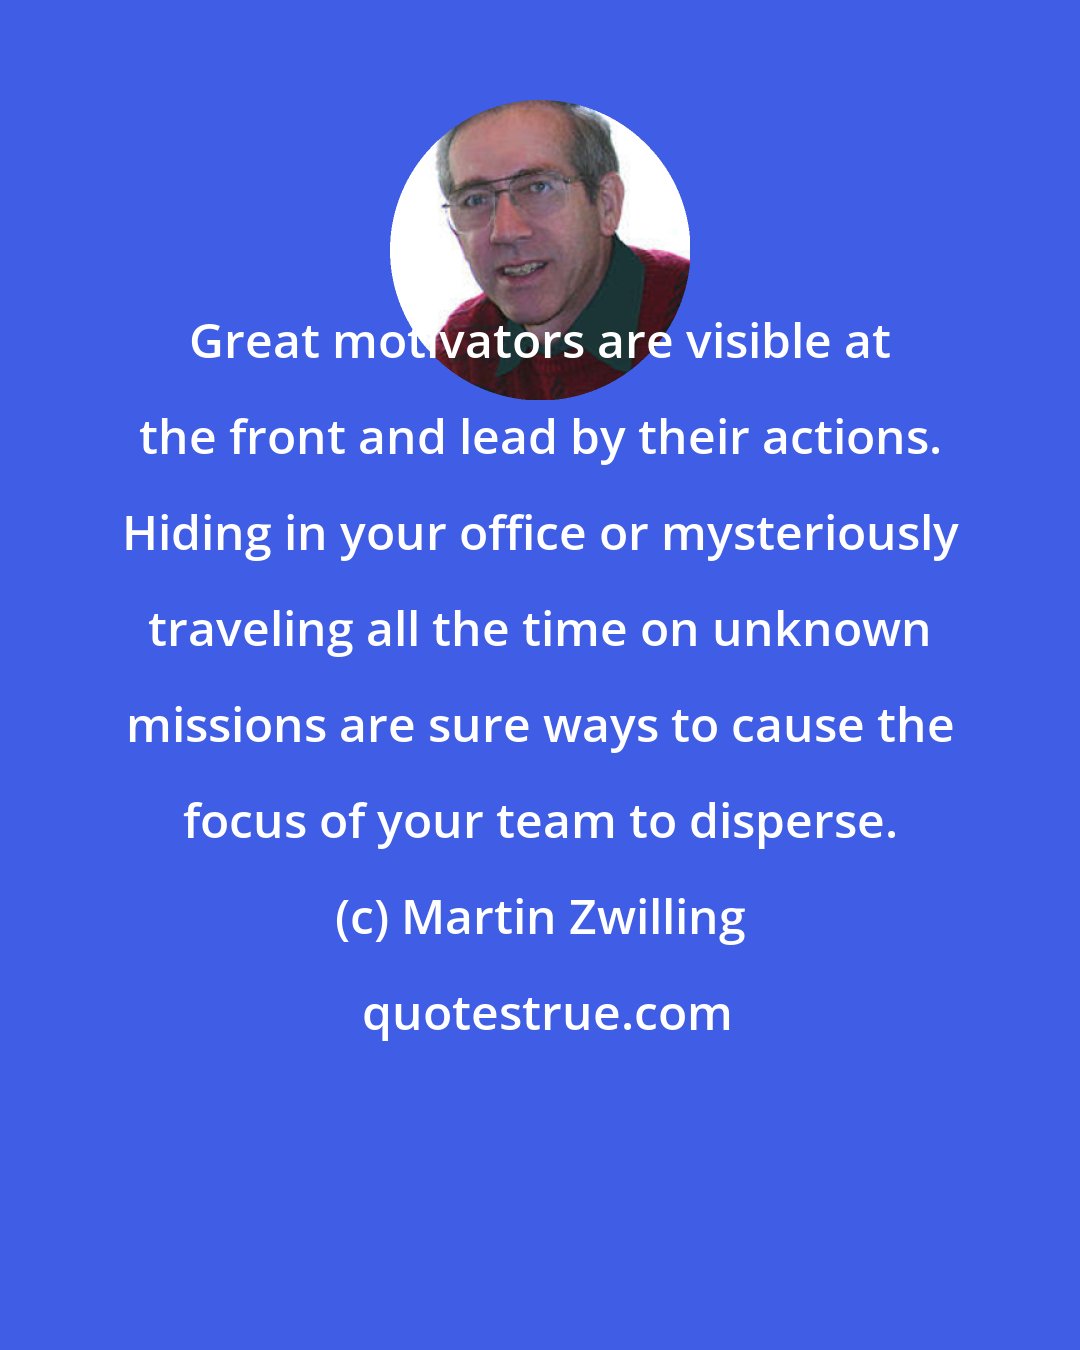 Martin Zwilling: Great motivators are visible at the front and lead by their actions. Hiding in your office or mysteriously traveling all the time on unknown missions are sure ways to cause the focus of your team to disperse.